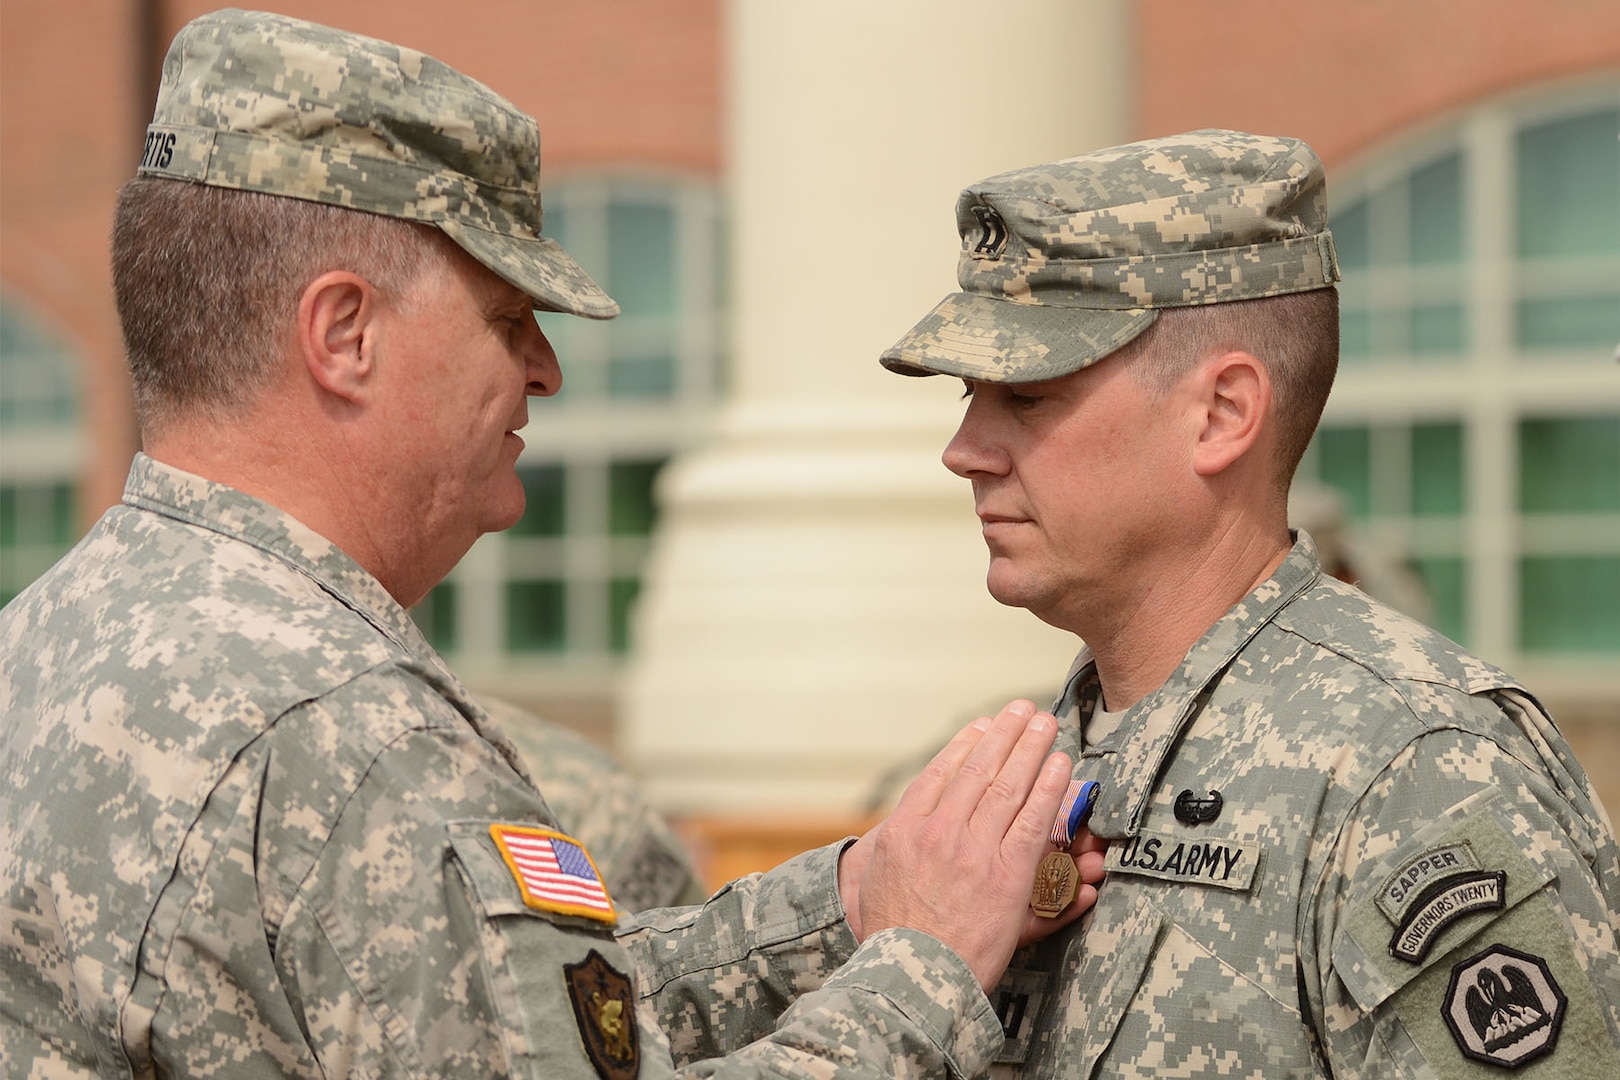 Louisiana National Guard Capt. Andrew Gremillion receives the Soldier's Medal from Maj. Gen. Glenn H. Curtis, adjutant general of the Louisiana National Guard, during a ceremony in Baton Rouge, Louisiana., Oct. 30, 2015. Gremillion was recognized with the highest award for non-combat valor for risking his life to save a woman trapped in a sinking car.